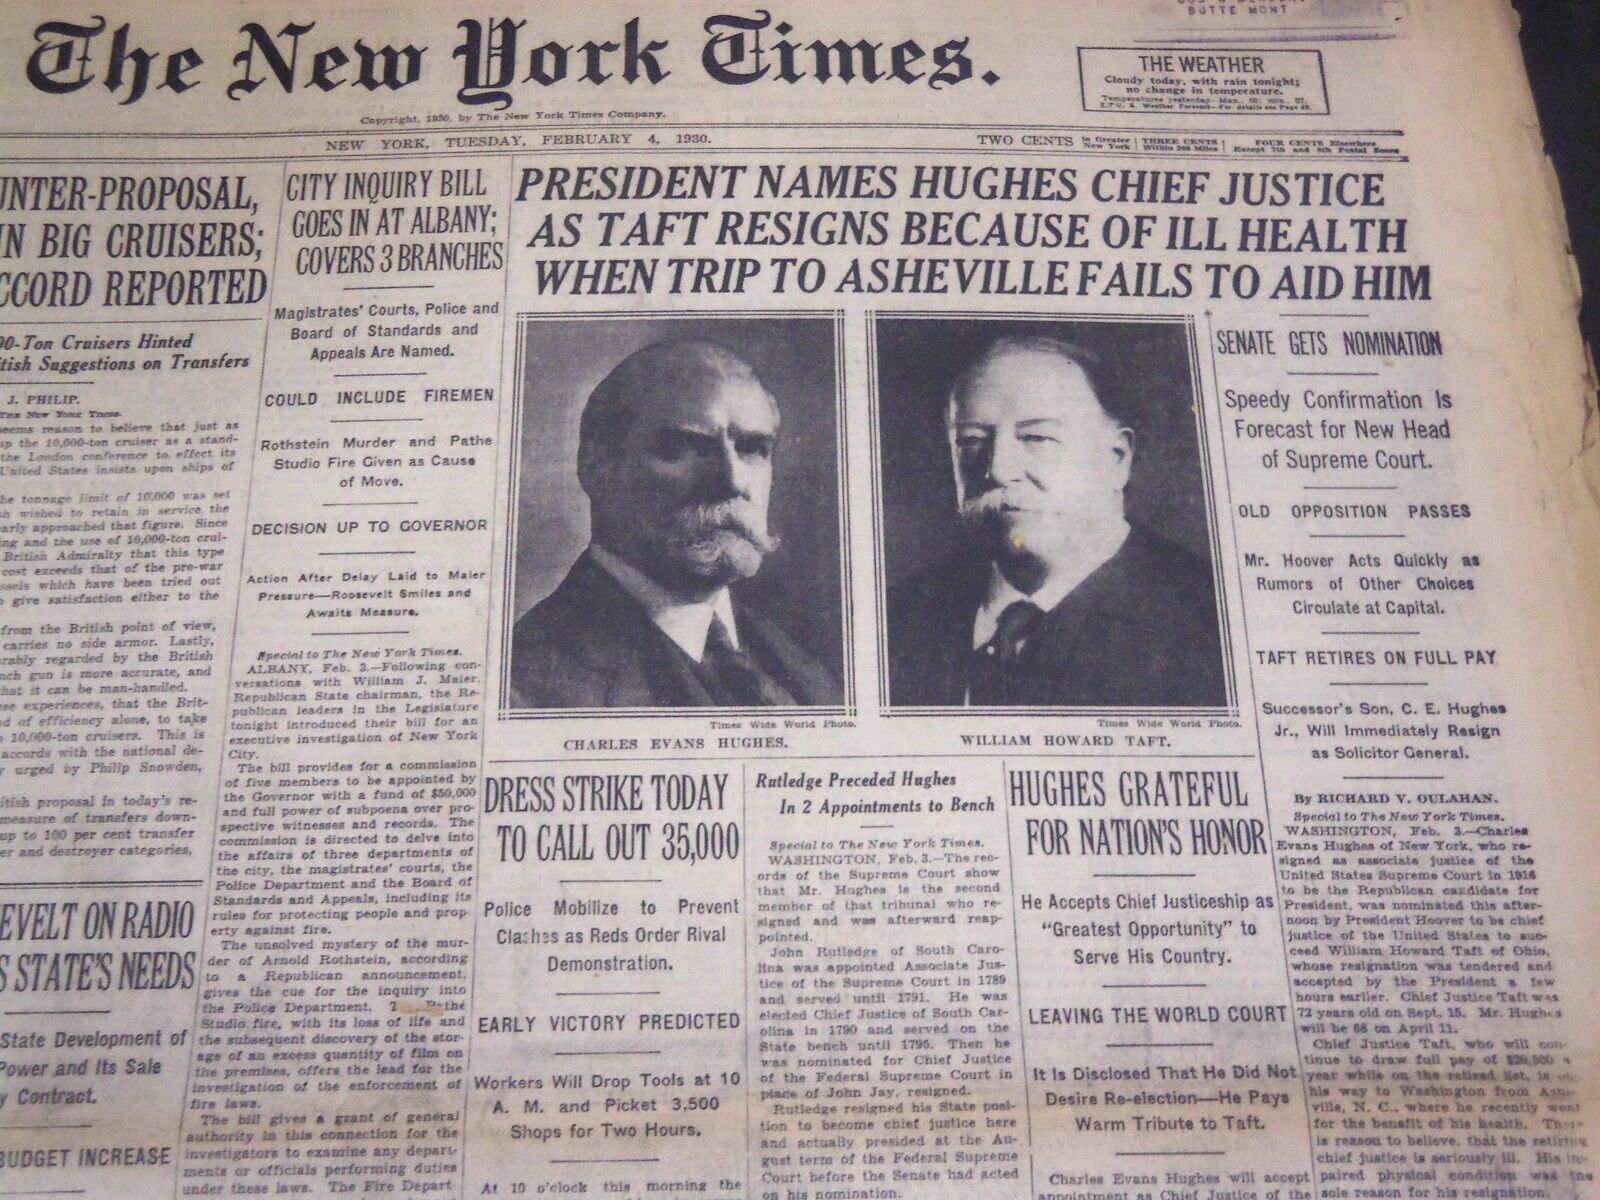 1930 FEB 4 NEW YORK TIMES - PRESIDENT NAMES HUGHES CHIEF JUSTICE - NT 4947